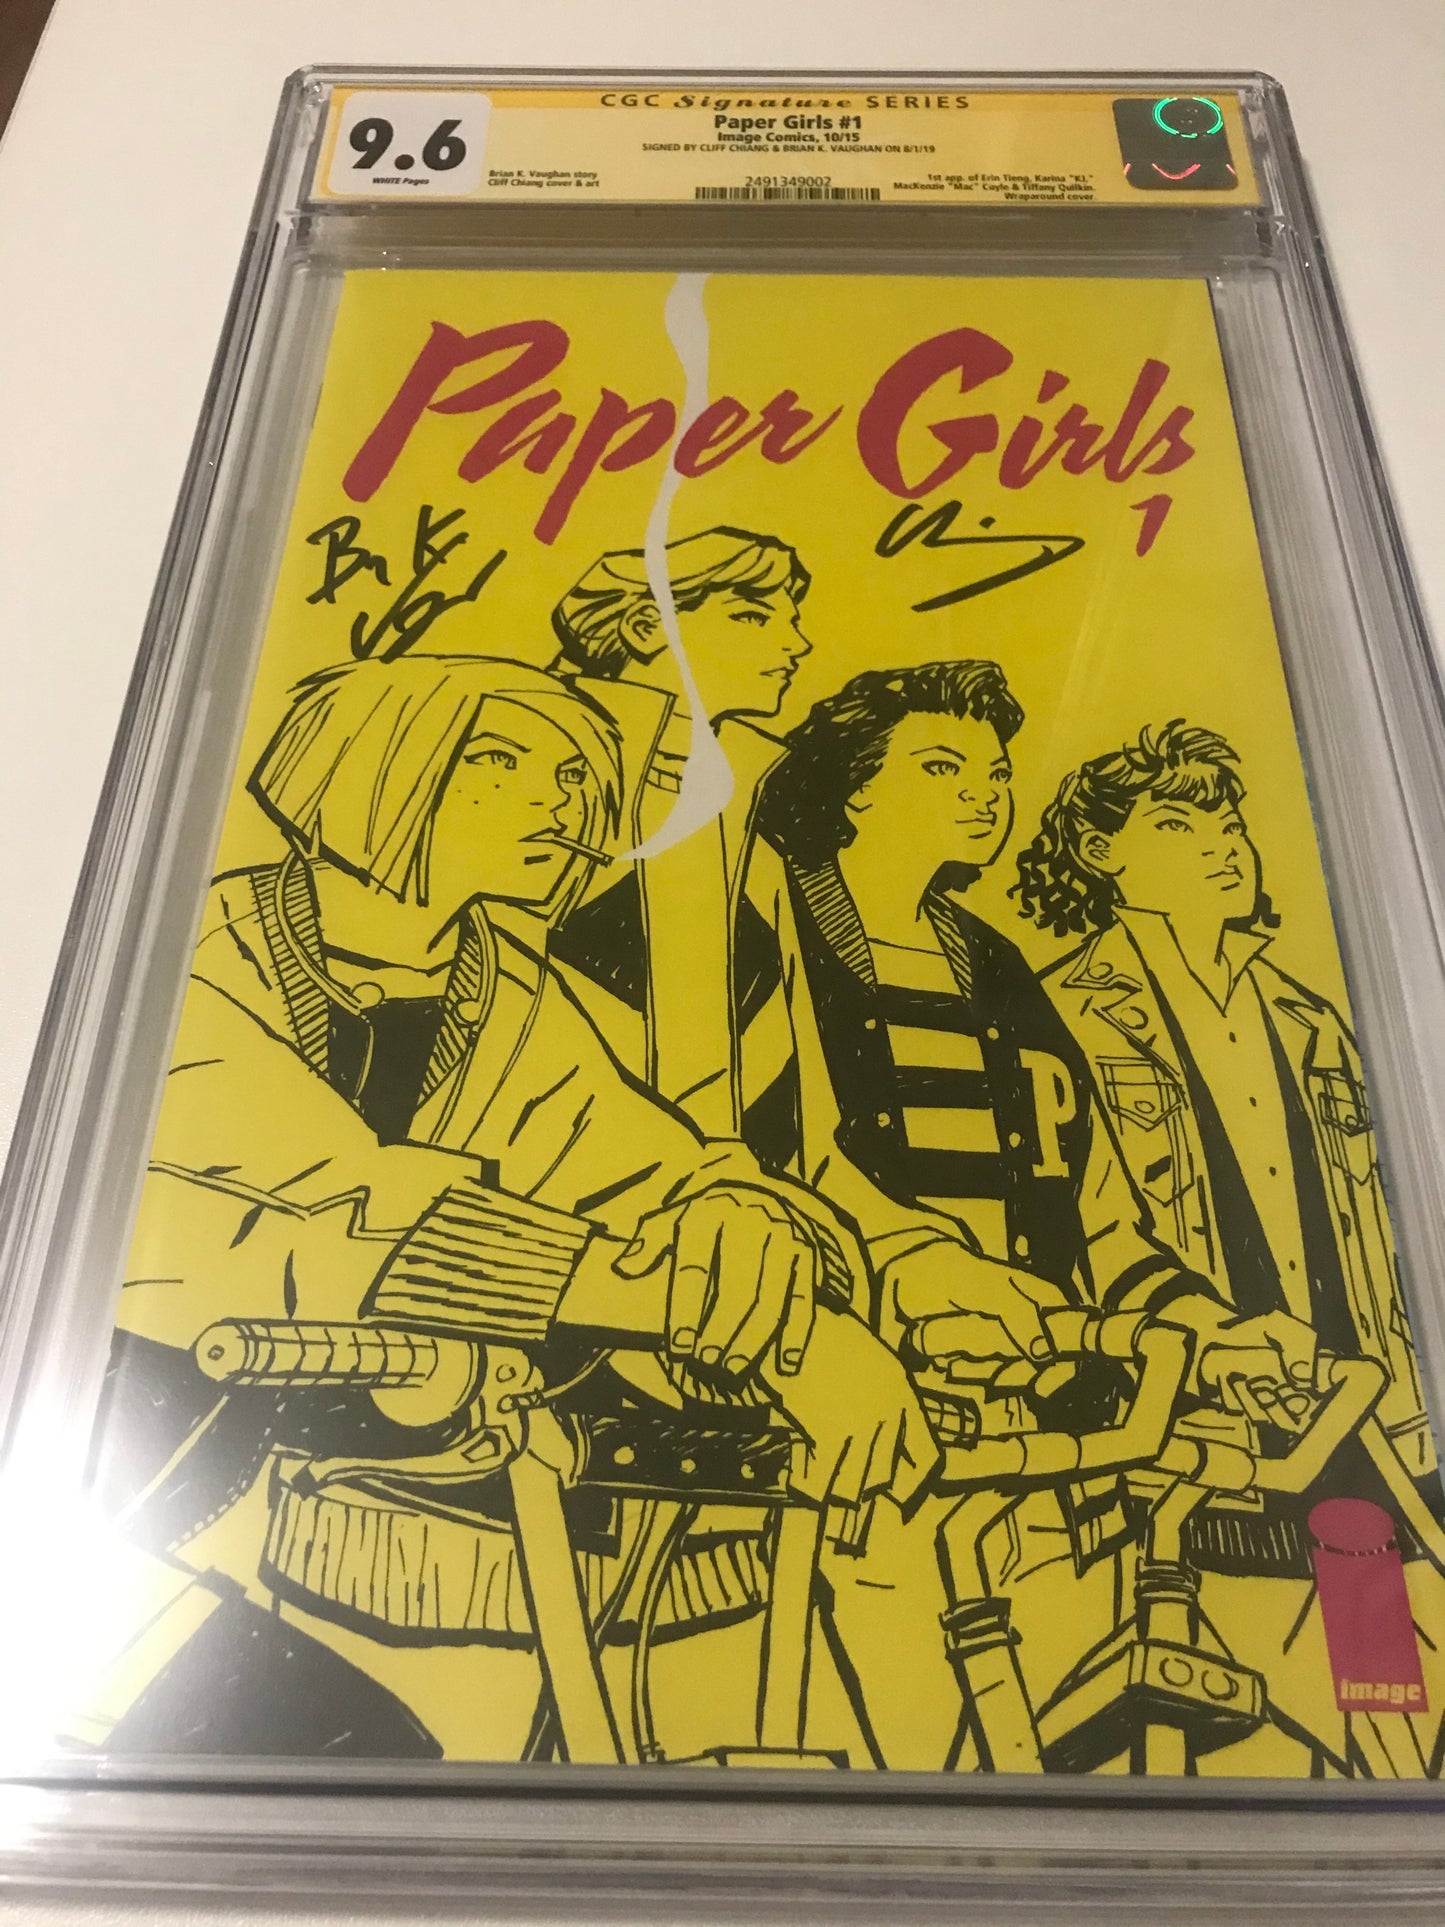 Paper Girls 1 - CGC Signed By Brian K. Vaughn & Cliff Chiang - Heroes Cave